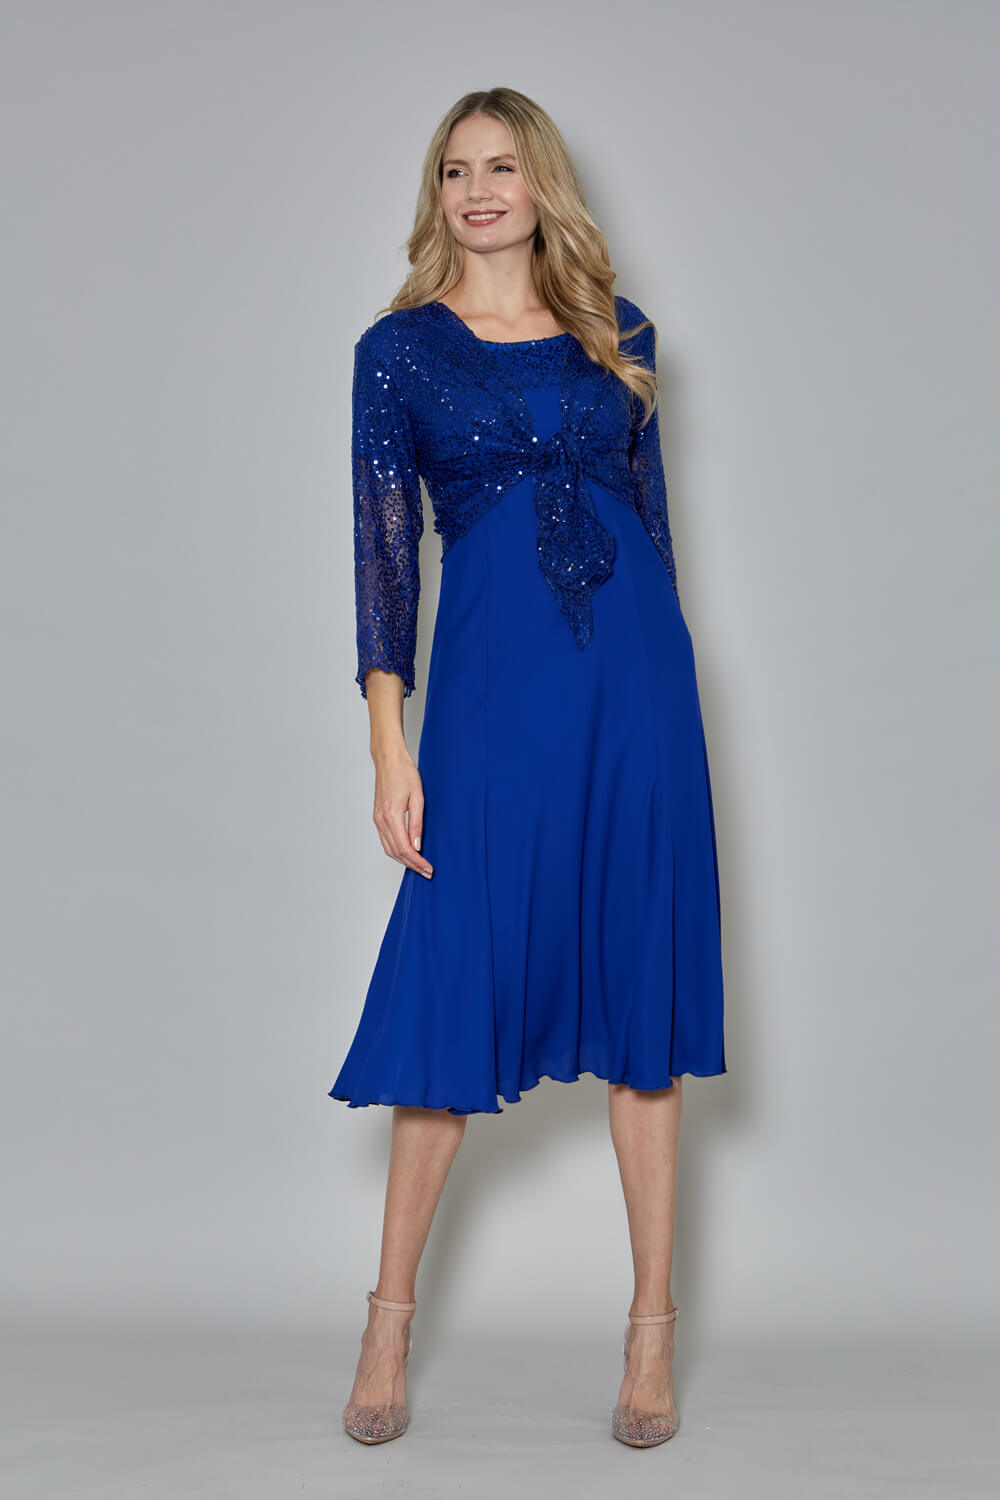 Royal Blue Julianna Georgette Fit and Flare Dress, Image 4 of 4